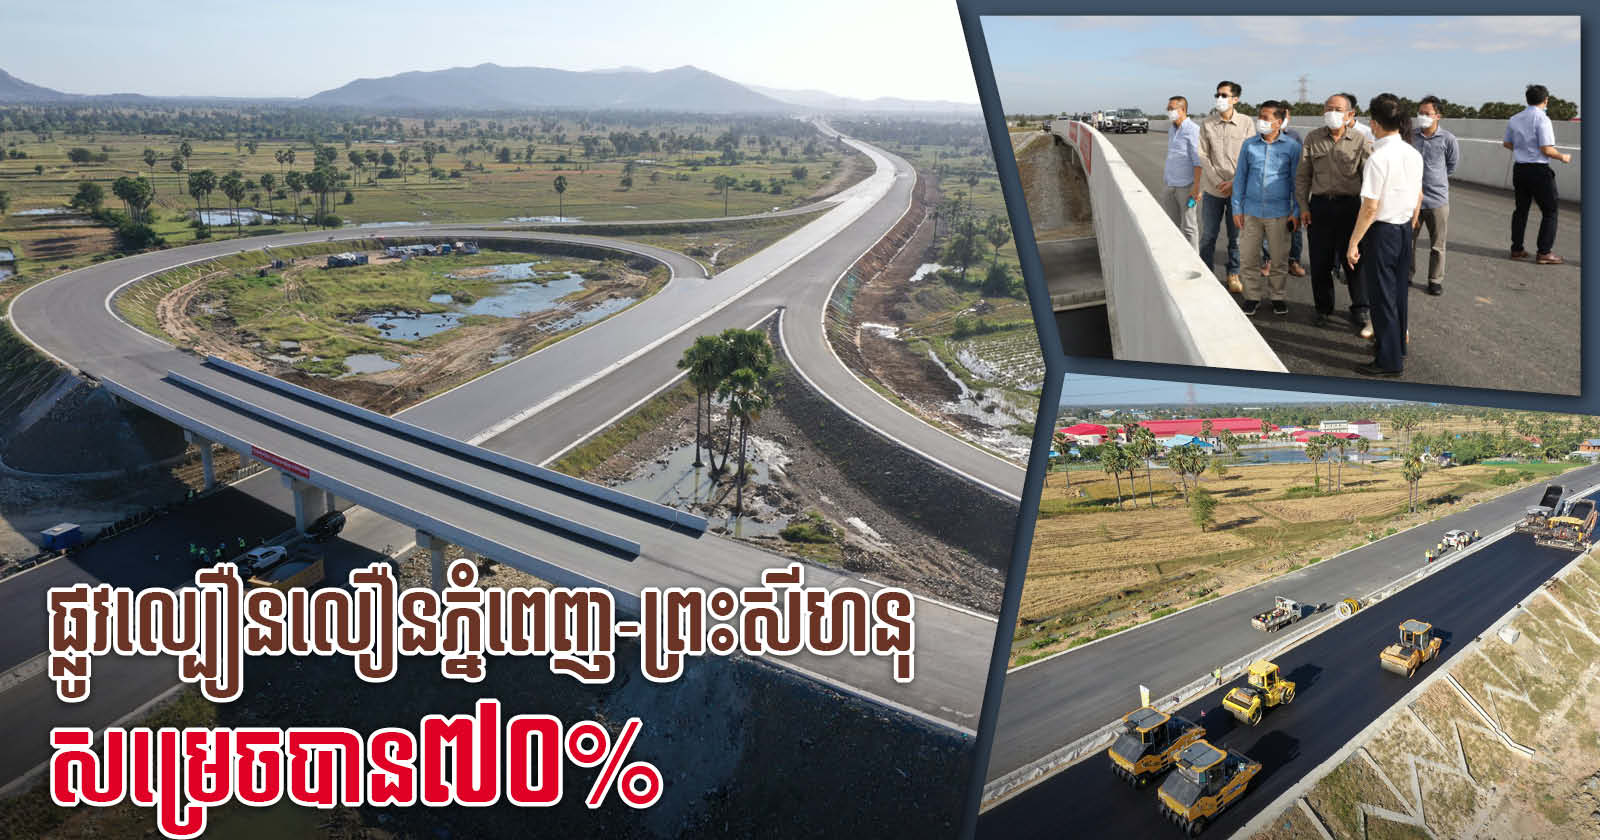 Construction of PP-SHV Expressway Over 70% Complete